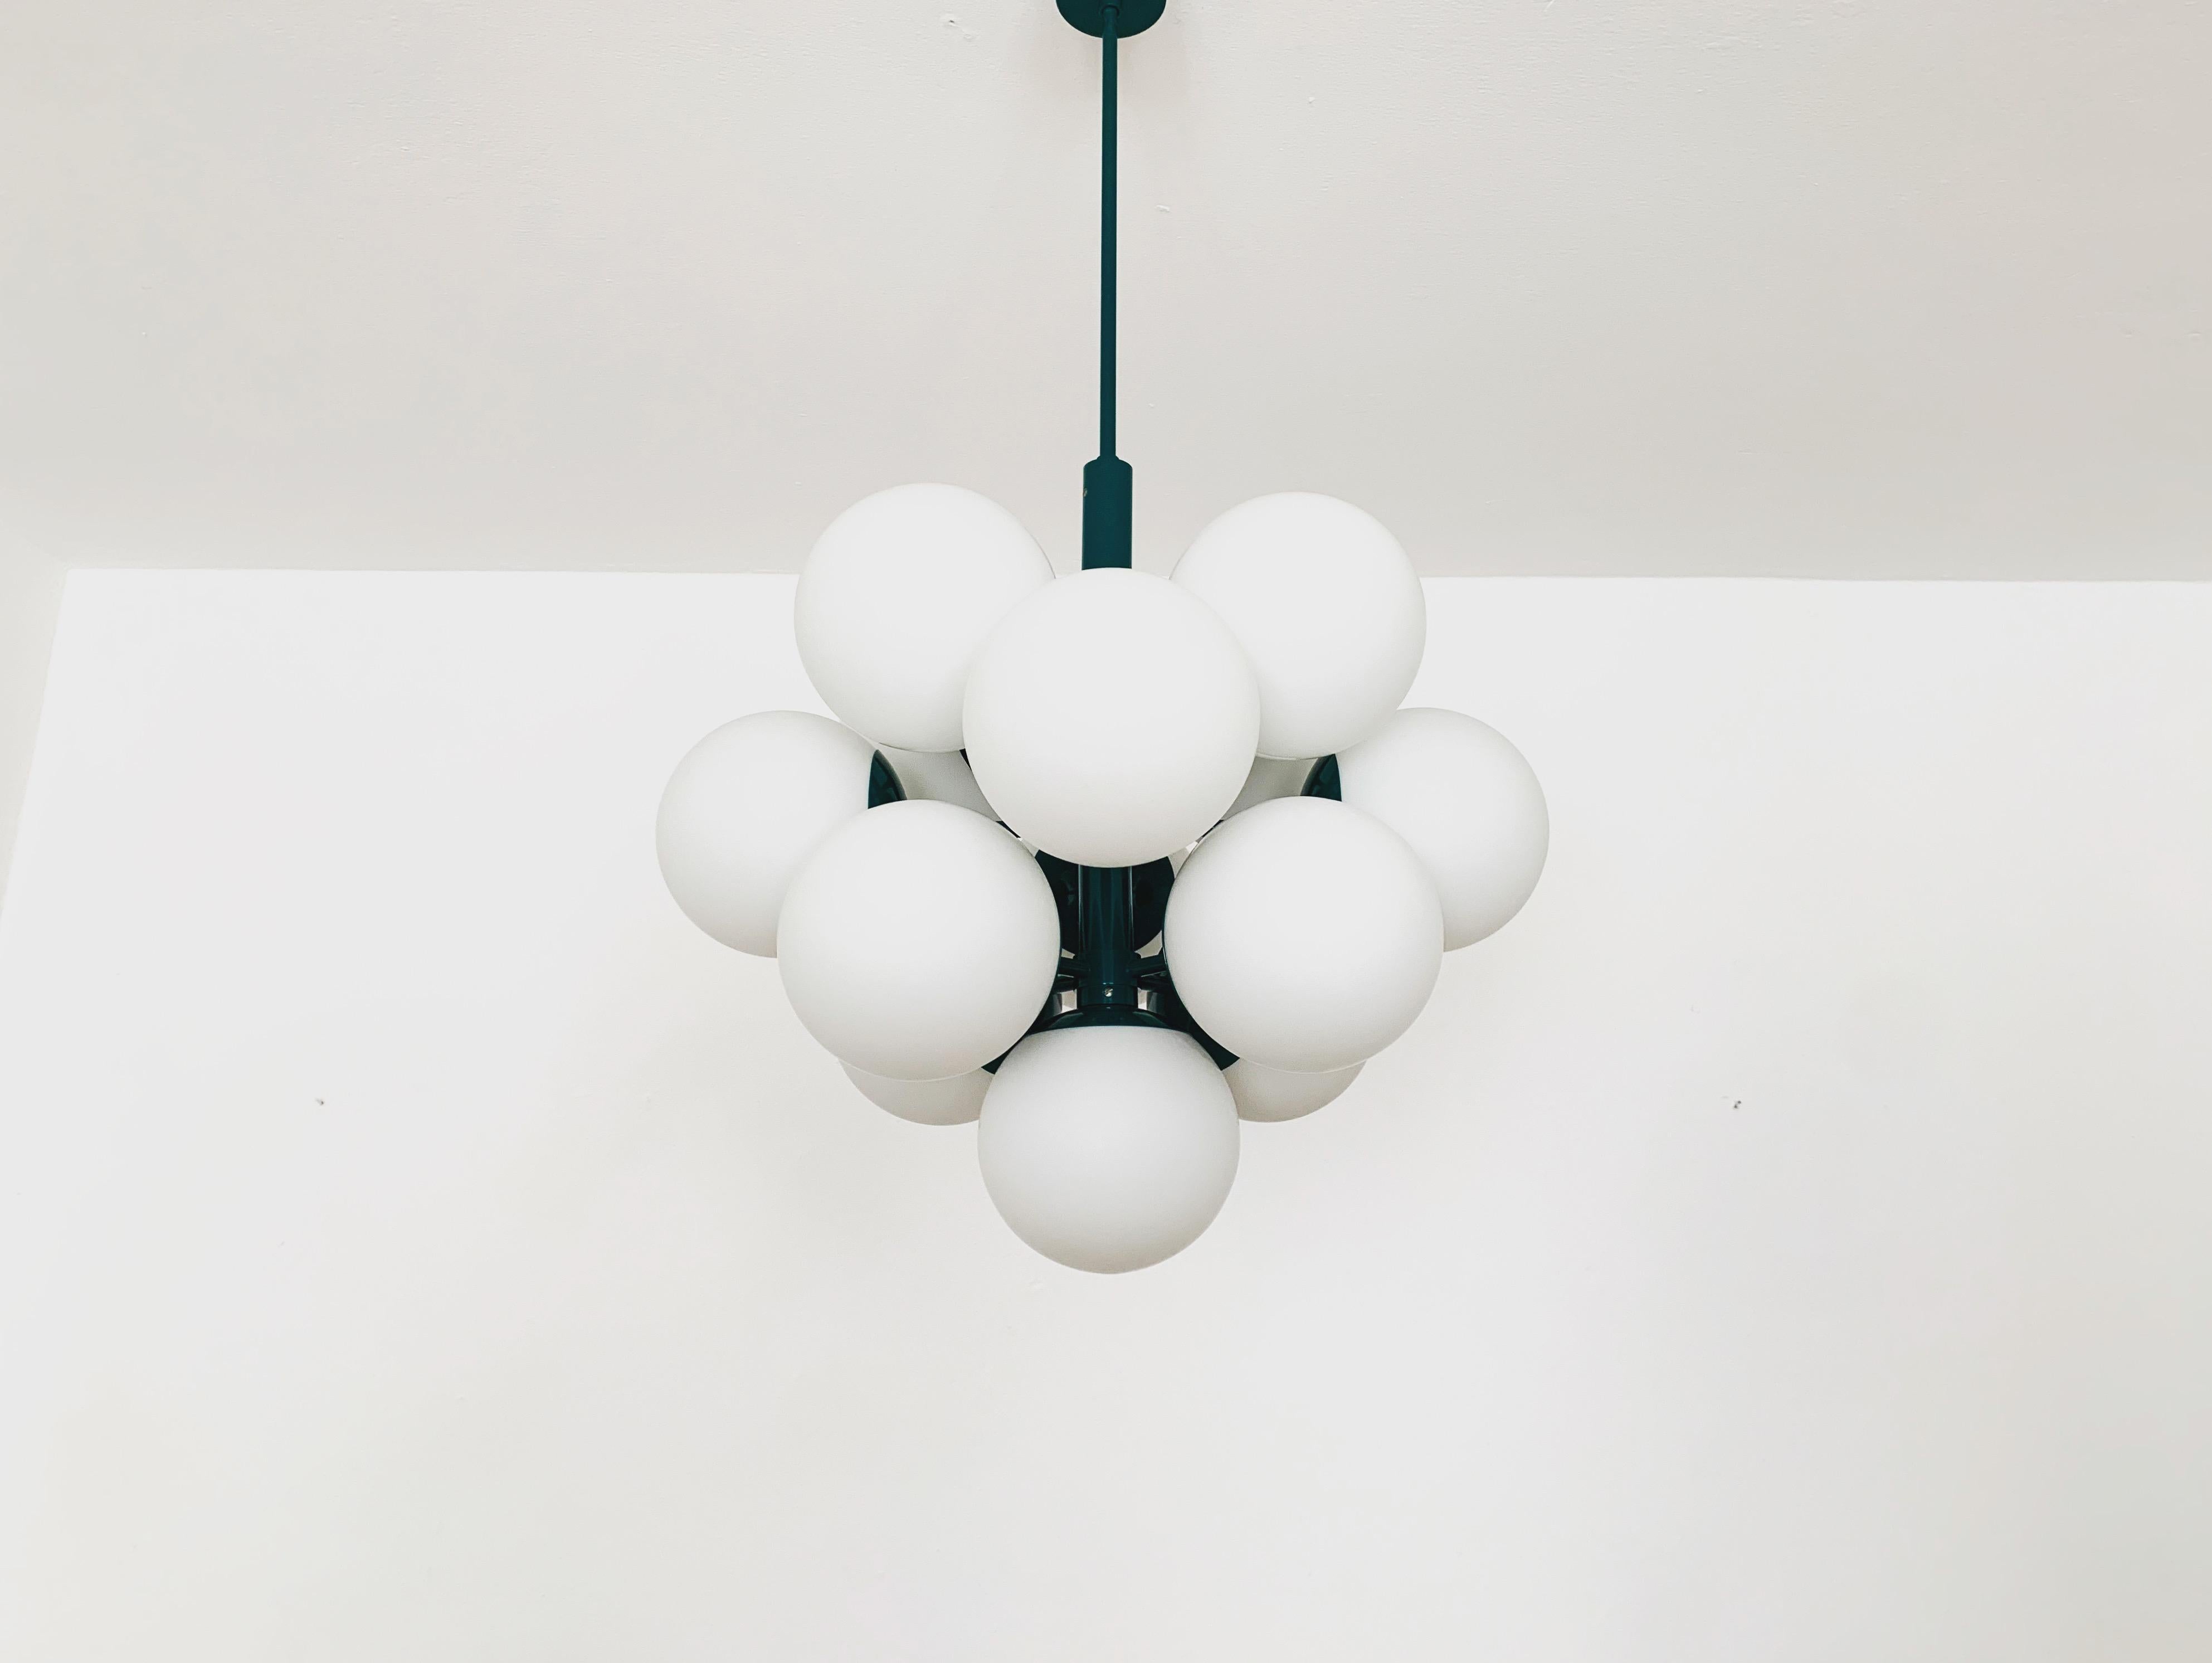 Extremely beautiful and large Sputnik chandelier from the 1960s.
The 13 opal glass lampshades spread a pleasant light.
The lamp has a very high quality finish.
Very contemporary design with a fantastic look.

Manufacturer: Kaiser